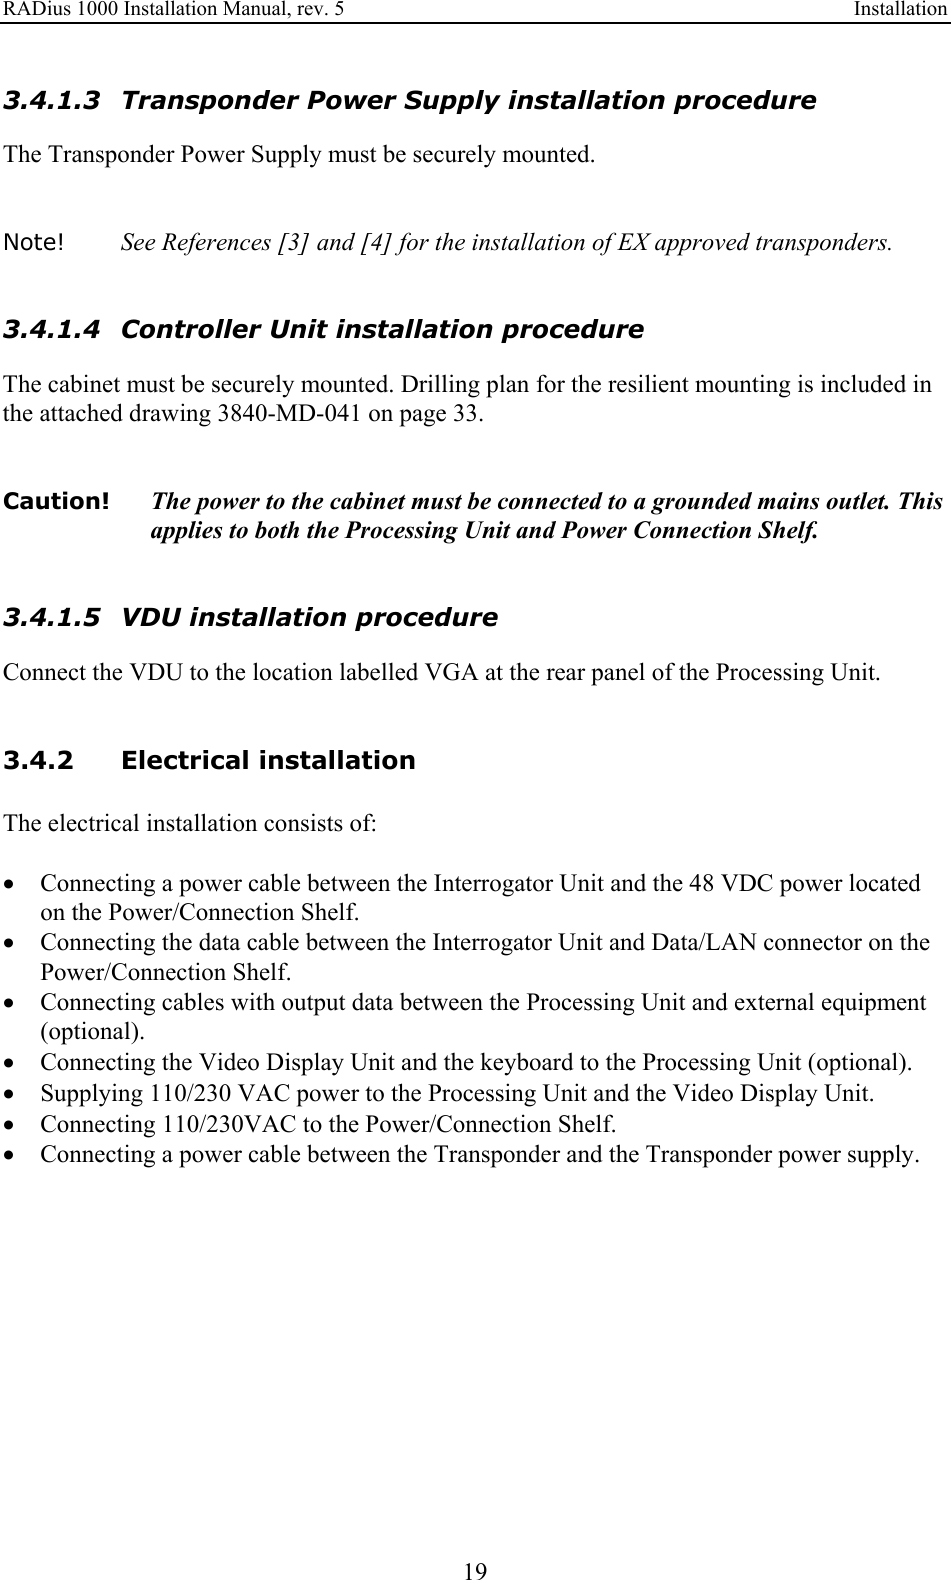 RADius 1000 Installation Manual, rev. 5    Installation 19 3.4.1.3 Transponder Power Supply installation procedure The Transponder Power Supply must be securely mounted.   Note!   See References [3] and [4] for the installation of EX approved transponders.   3.4.1.4 Controller Unit installation procedure The cabinet must be securely mounted. Drilling plan for the resilient mounting is included in the attached drawing 3840-MD-041 on page 33.   Caution!  The power to the cabinet must be connected to a grounded mains outlet. This applies to both the Processing Unit and Power Connection Shelf.   3.4.1.5 VDU installation procedure Connect the VDU to the location labelled VGA at the rear panel of the Processing Unit.    3.4.2 Electrical installation The electrical installation consists of:  • Connecting a power cable between the Interrogator Unit and the 48 VDC power located on the Power/Connection Shelf. • Connecting the data cable between the Interrogator Unit and Data/LAN connector on the Power/Connection Shelf. • Connecting cables with output data between the Processing Unit and external equipment (optional). • Connecting the Video Display Unit and the keyboard to the Processing Unit (optional). • Supplying 110/230 VAC power to the Processing Unit and the Video Display Unit. • Connecting 110/230VAC to the Power/Connection Shelf. • Connecting a power cable between the Transponder and the Transponder power supply.  